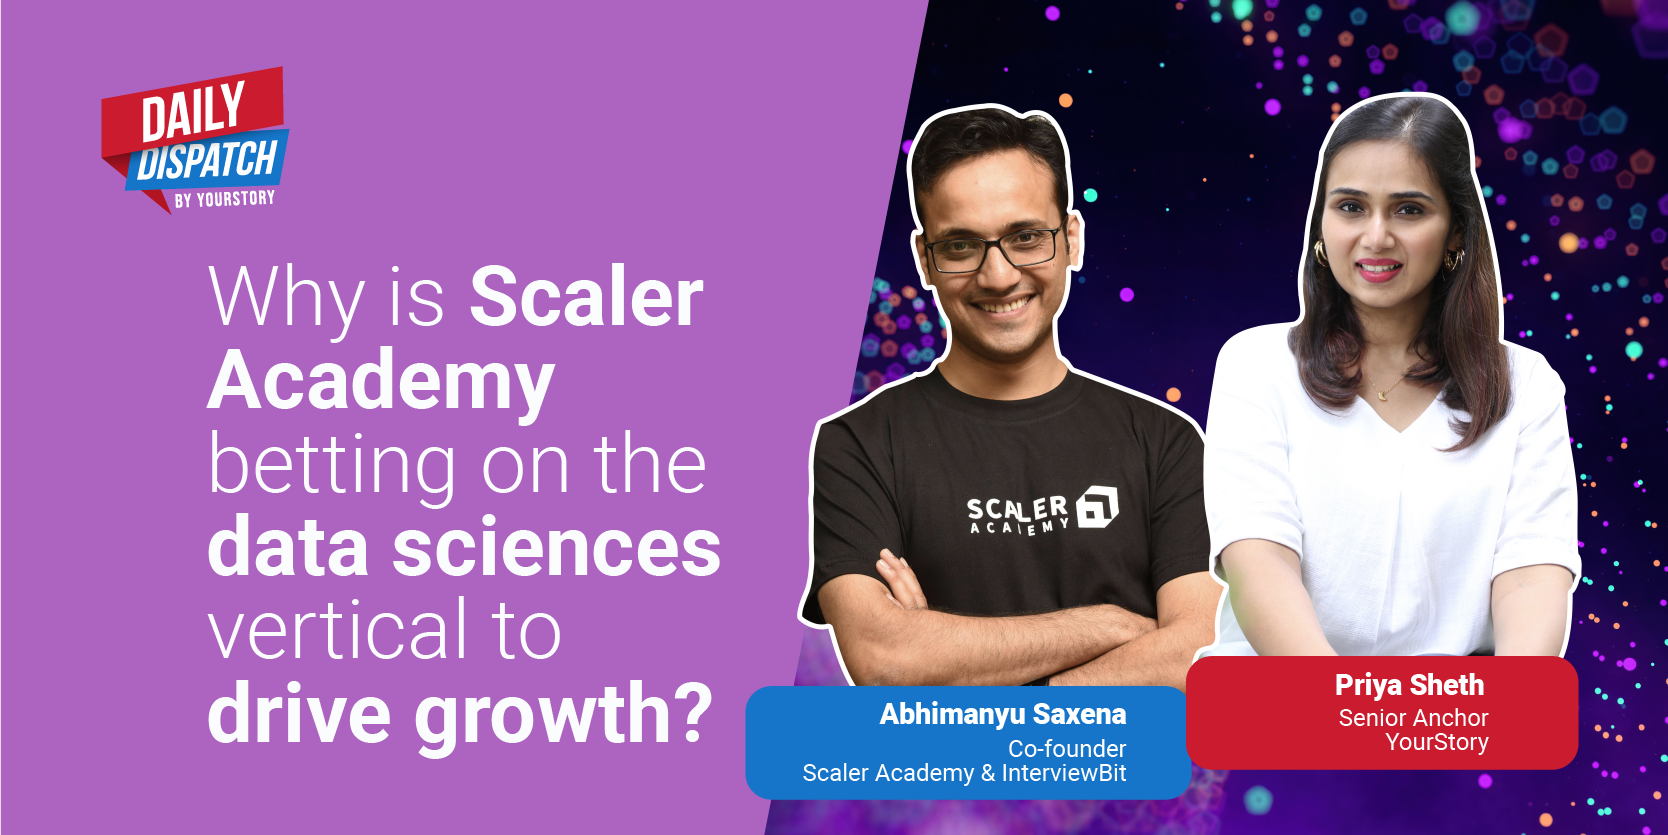 What makes data science a promising vertical for Scaler Academy? 
